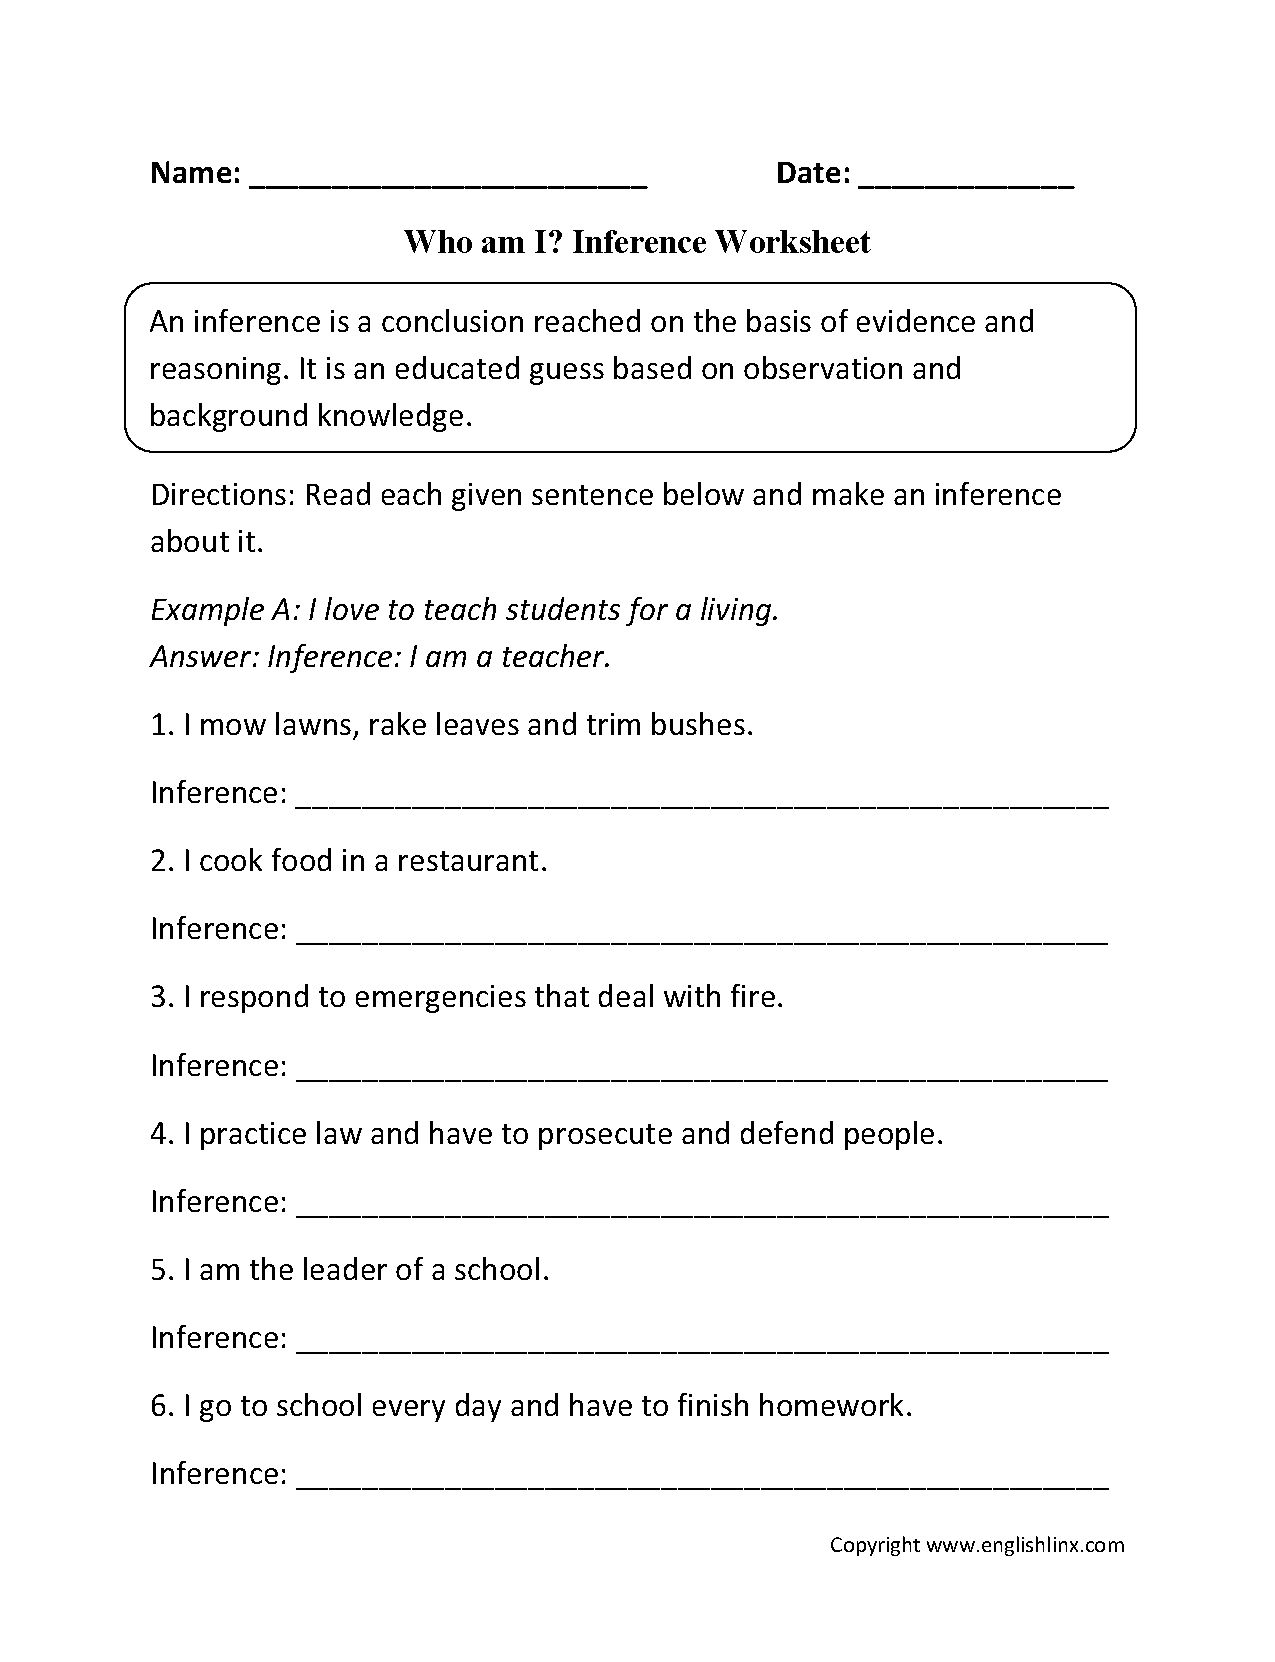 inference-worksheets-who-am-i-inference-worksheets